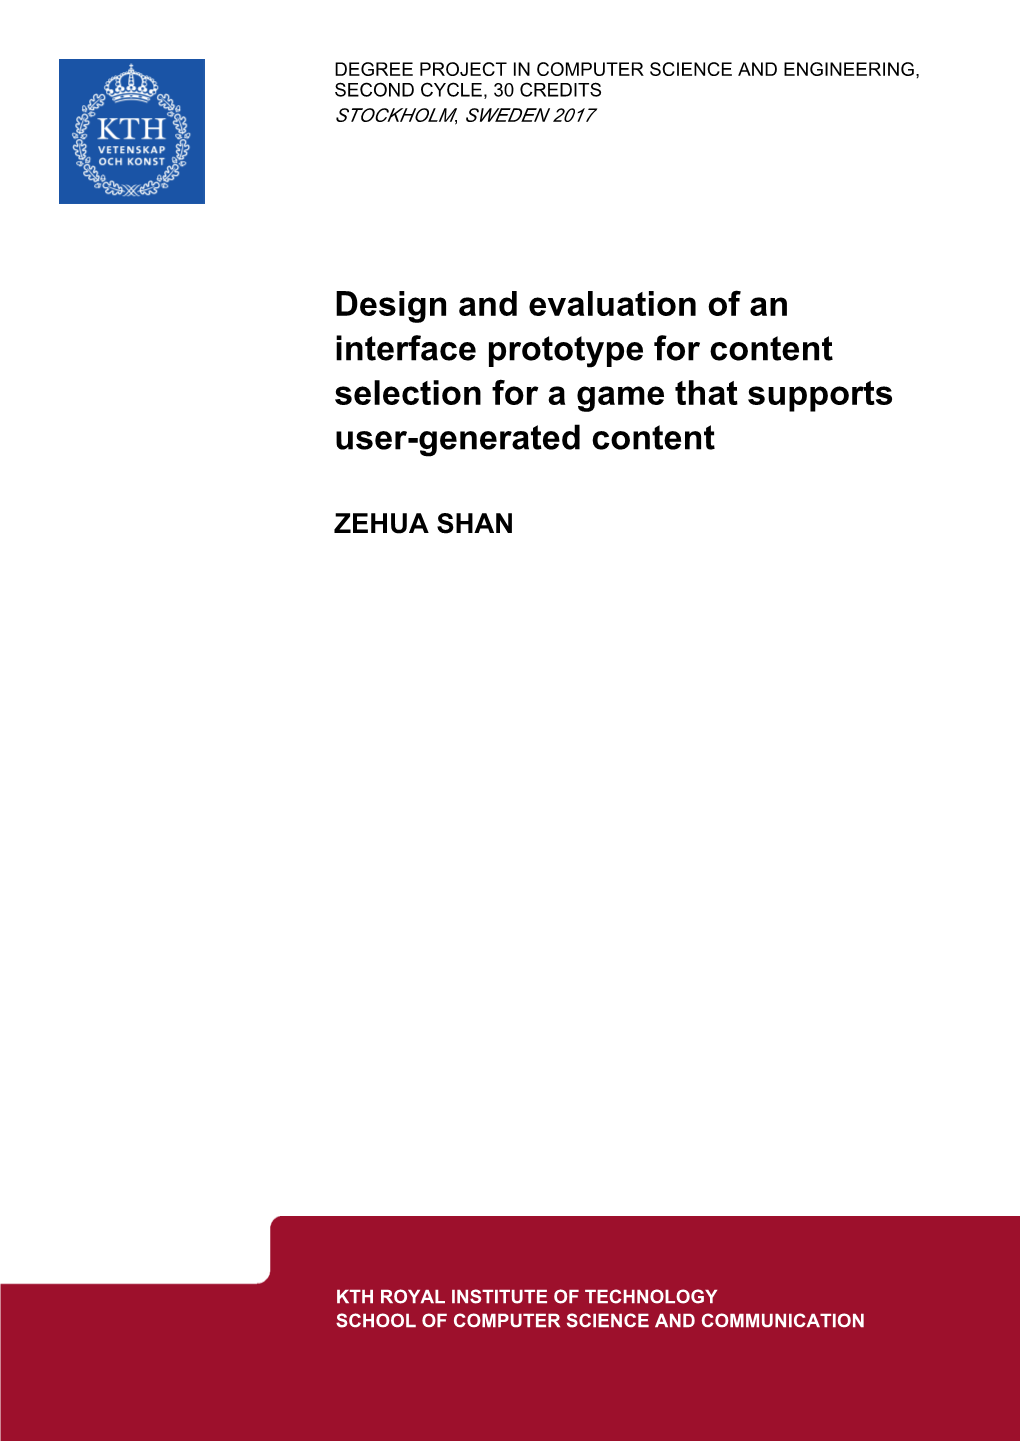 Design and Evaluation of an Interface Prototype for Content Selection for a Game That Supports User-Generated Content